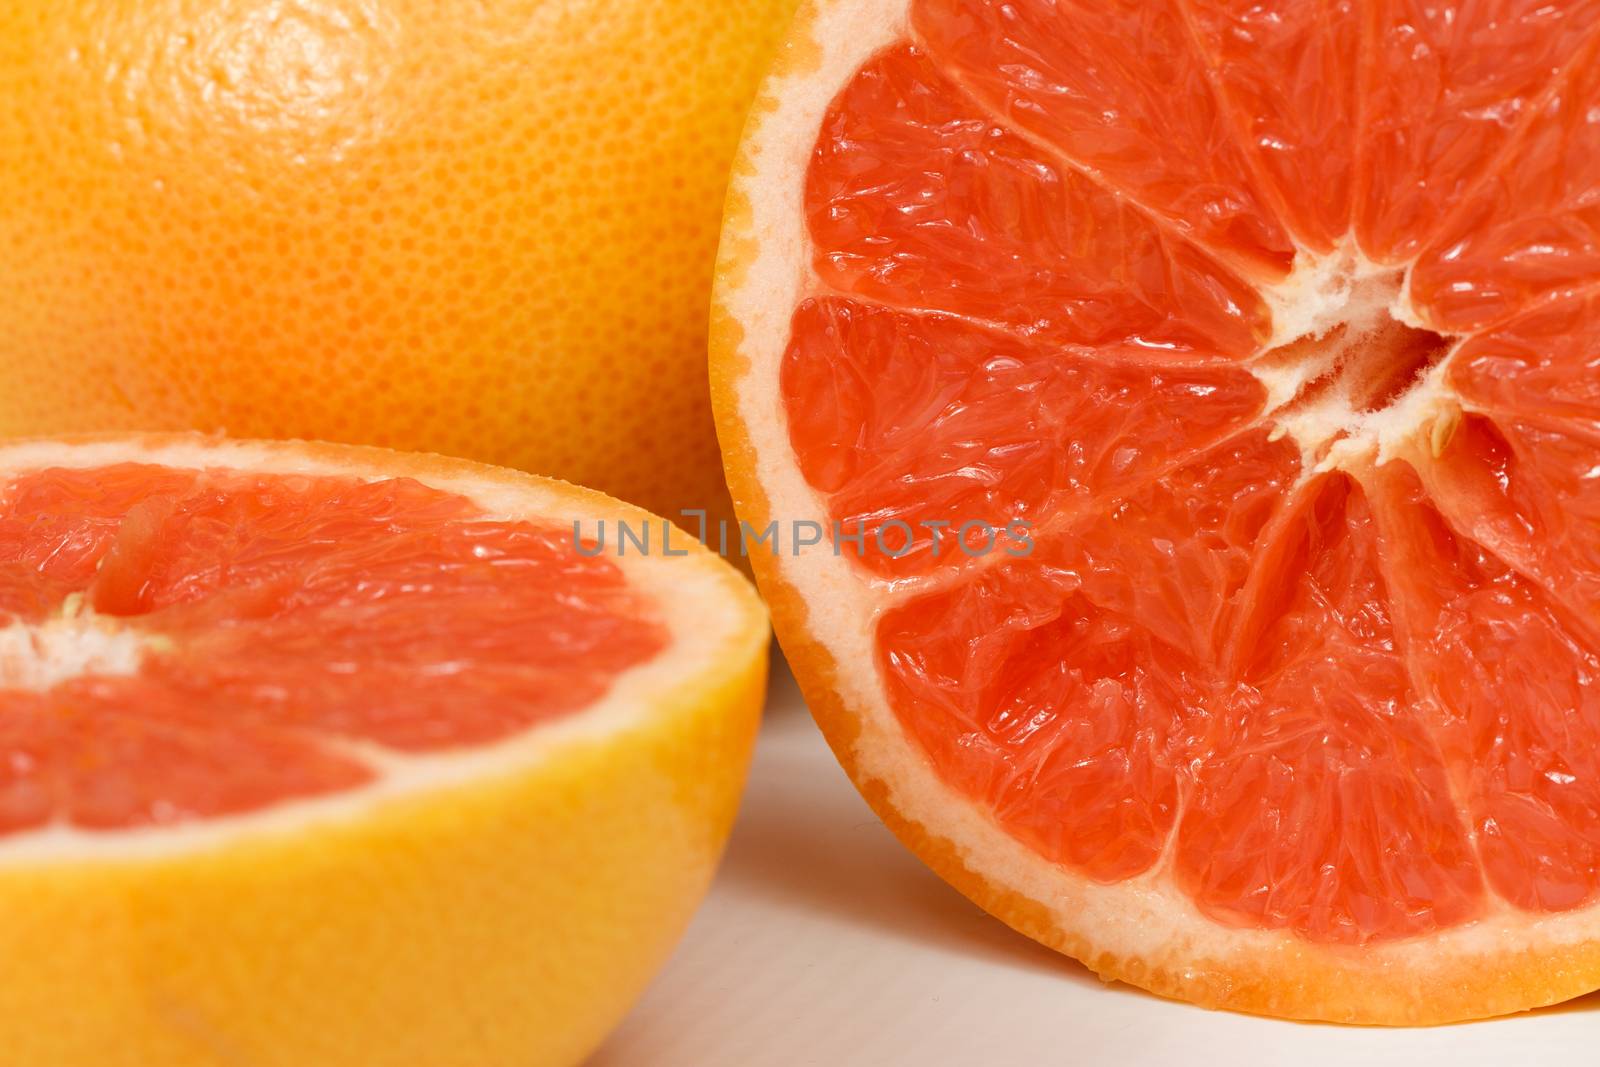 Halved red grapefruit by MilanMarkovic78